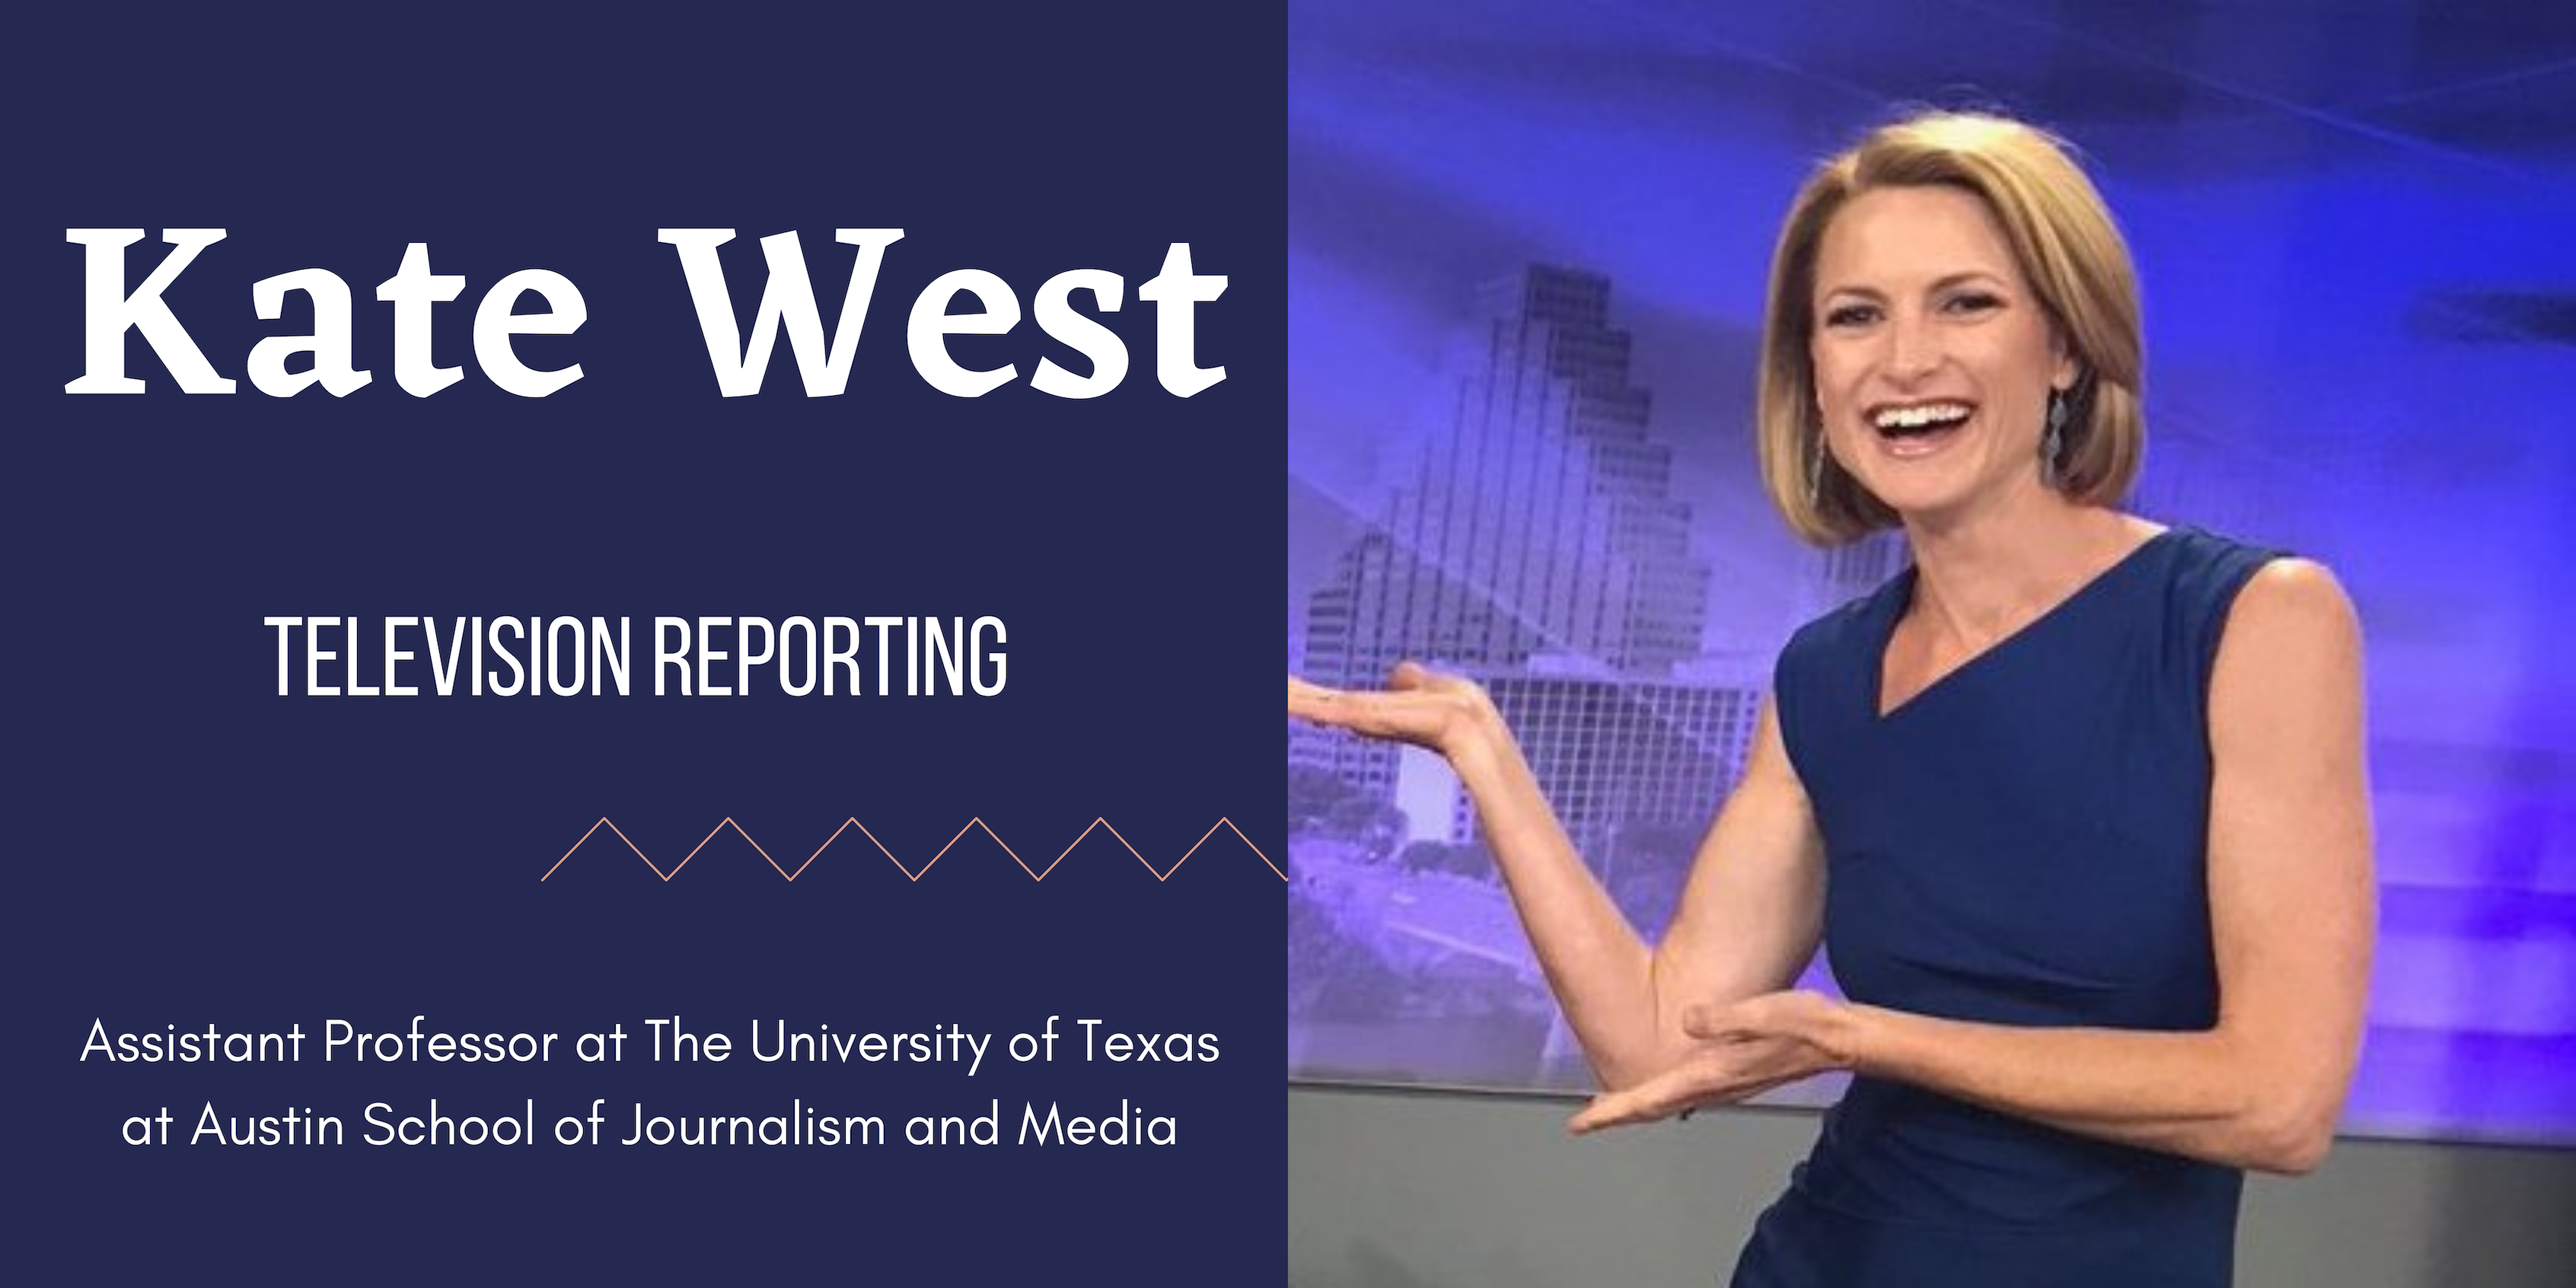 On the right is a photo of Kate West. On the left on a dark purple background is white text that says, "Kate West," "Television Reporting," and her job title.